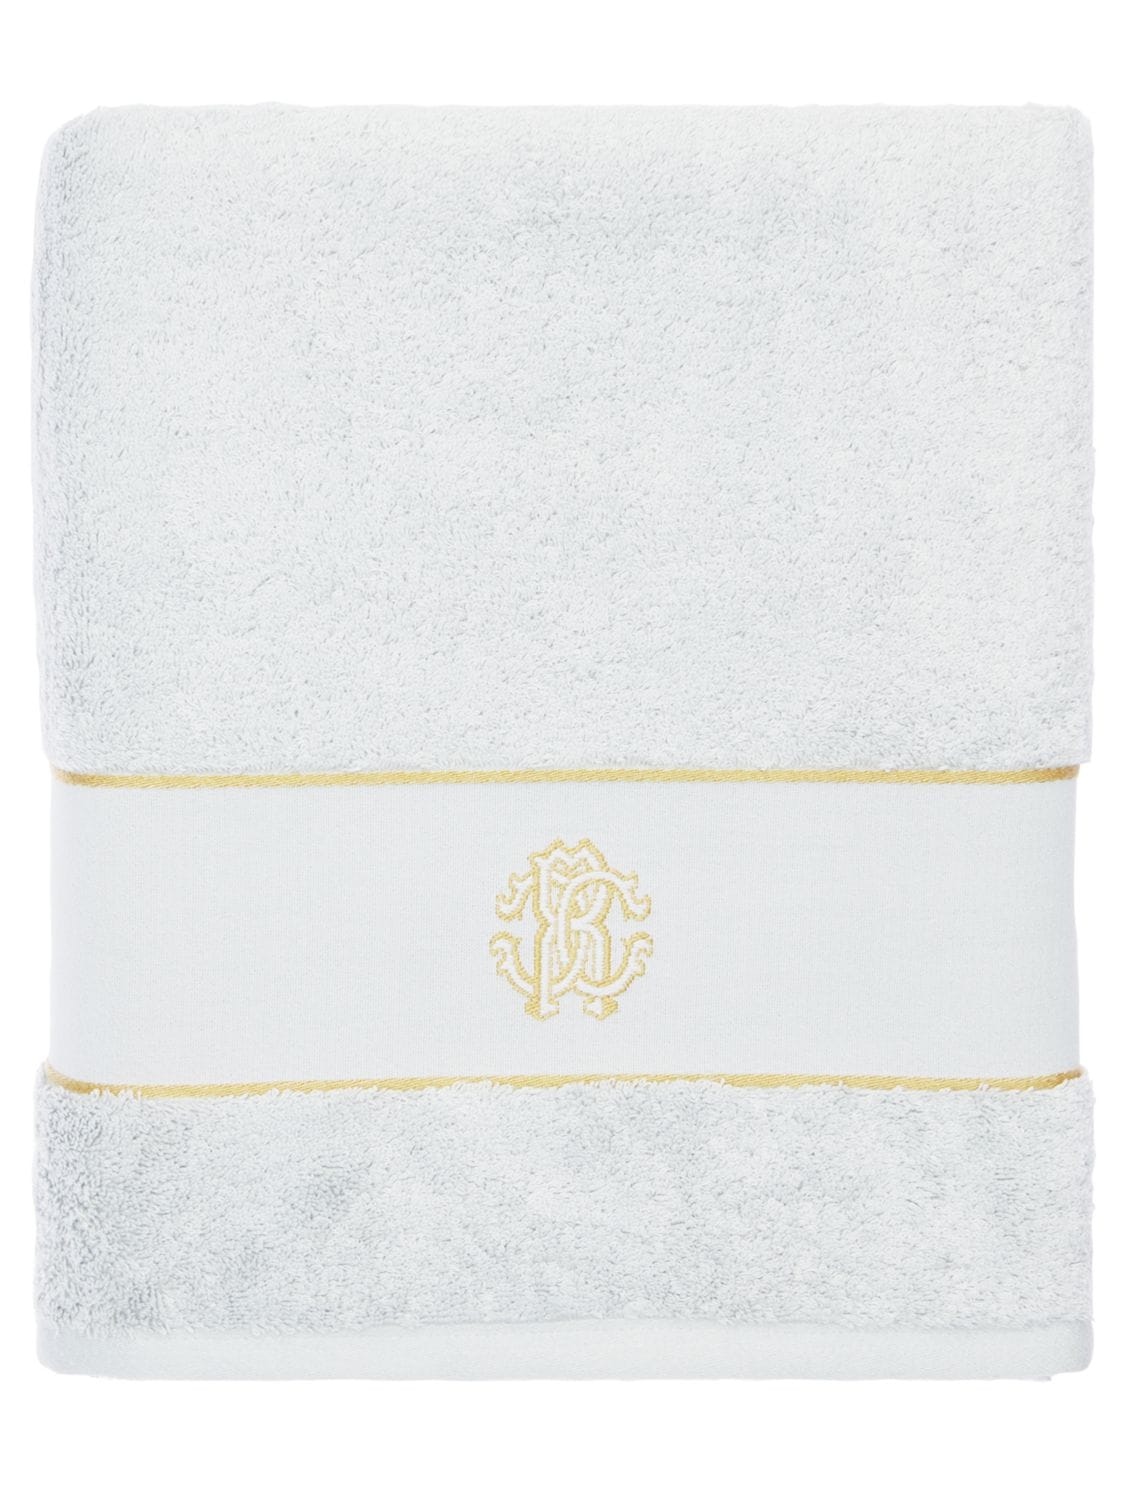 Image of Gold New Cotton Towel